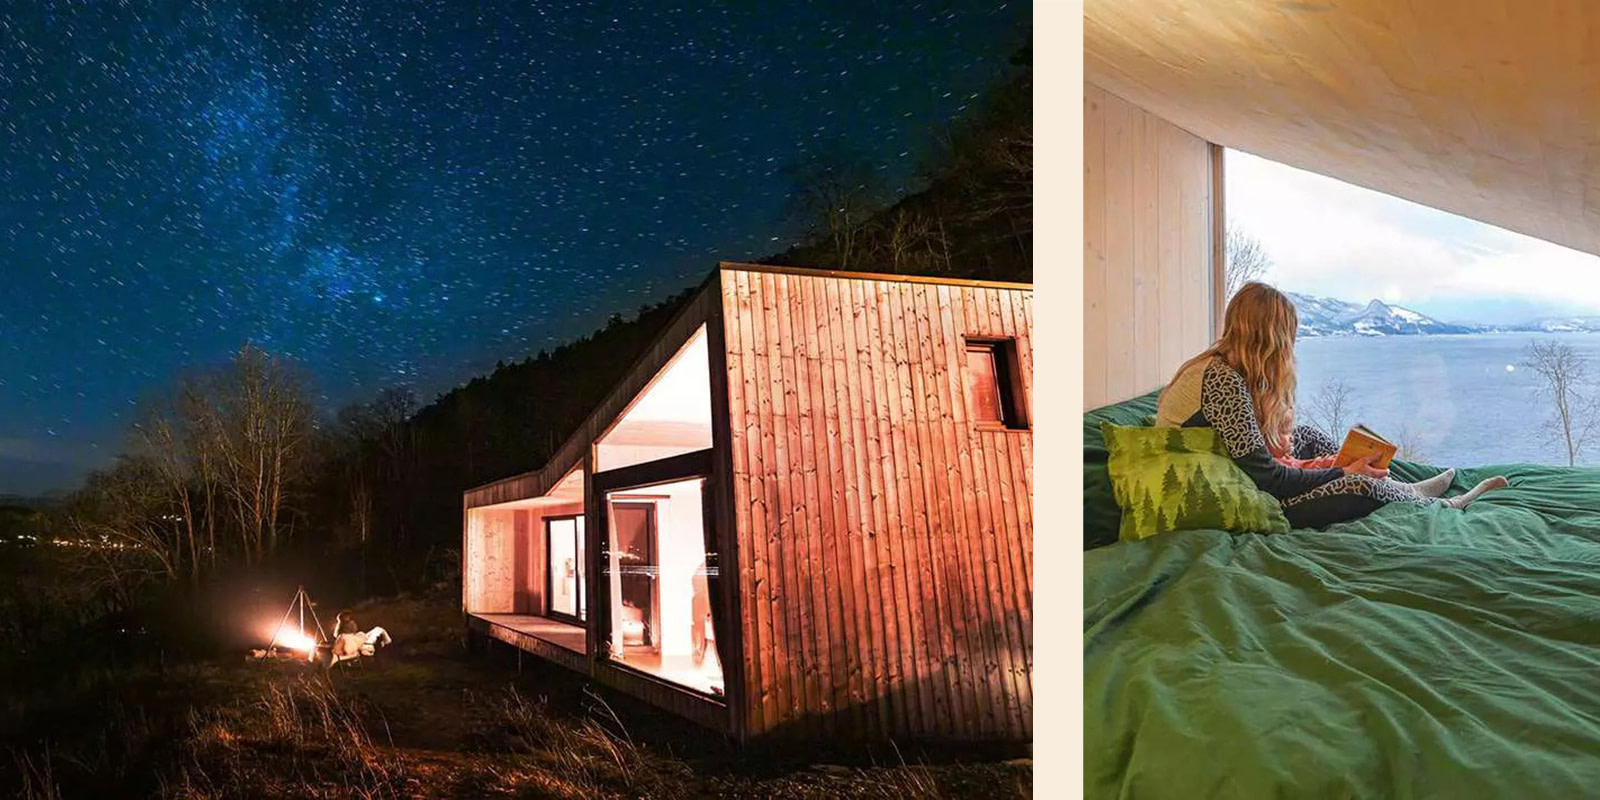 Book this wooden cabin that oerlooks a fjord in Norway